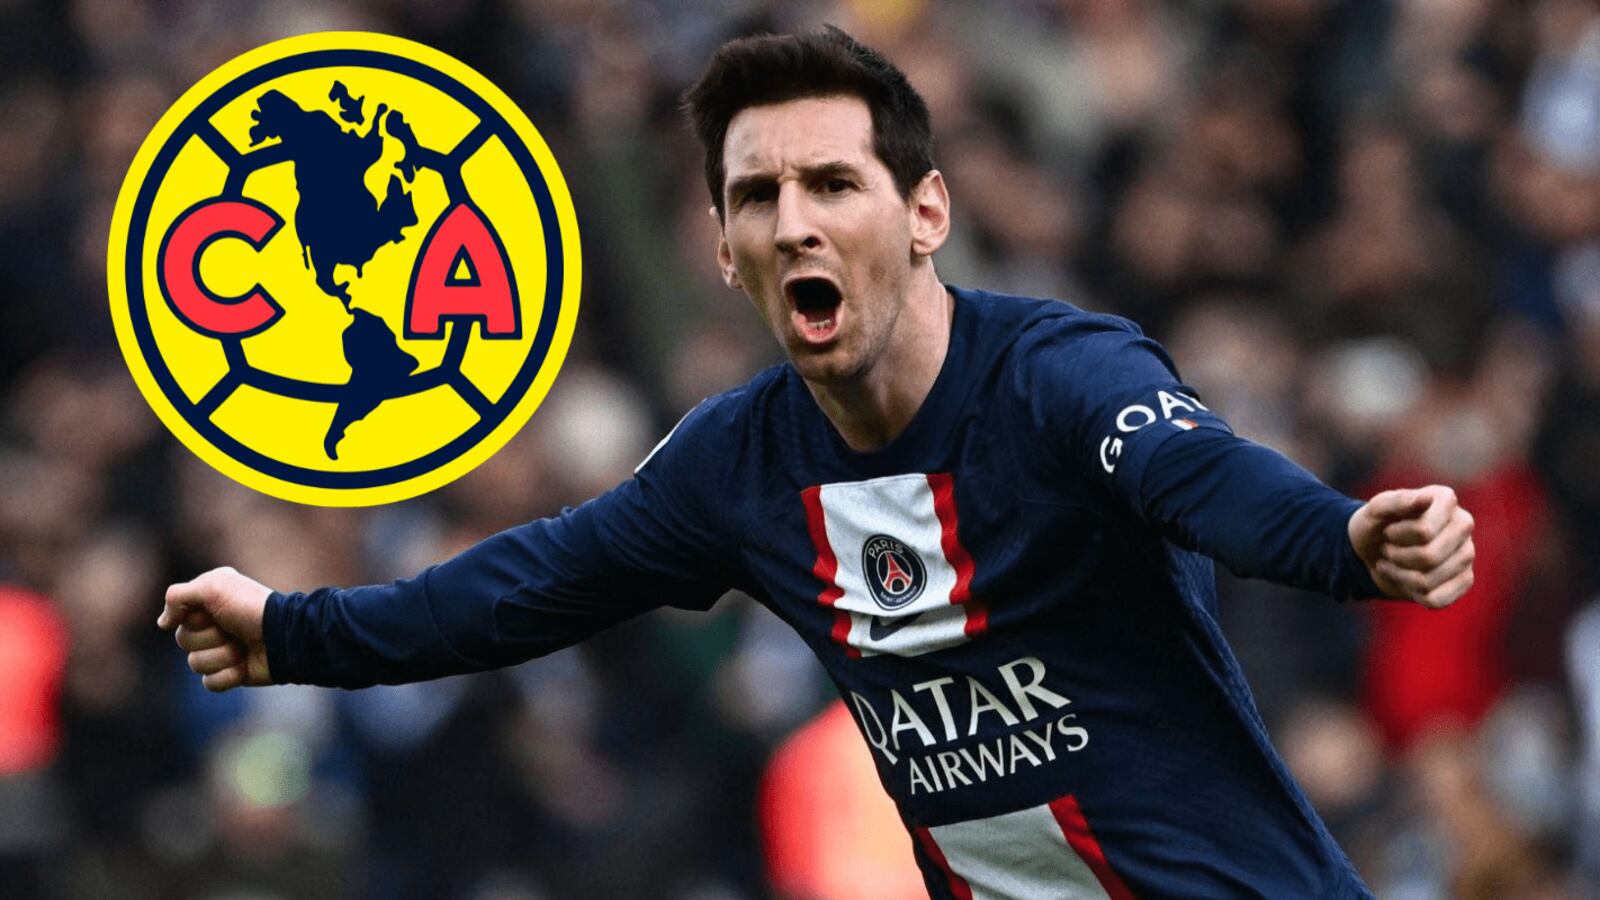 They called him the Mexican Messi, now he could sign for club America